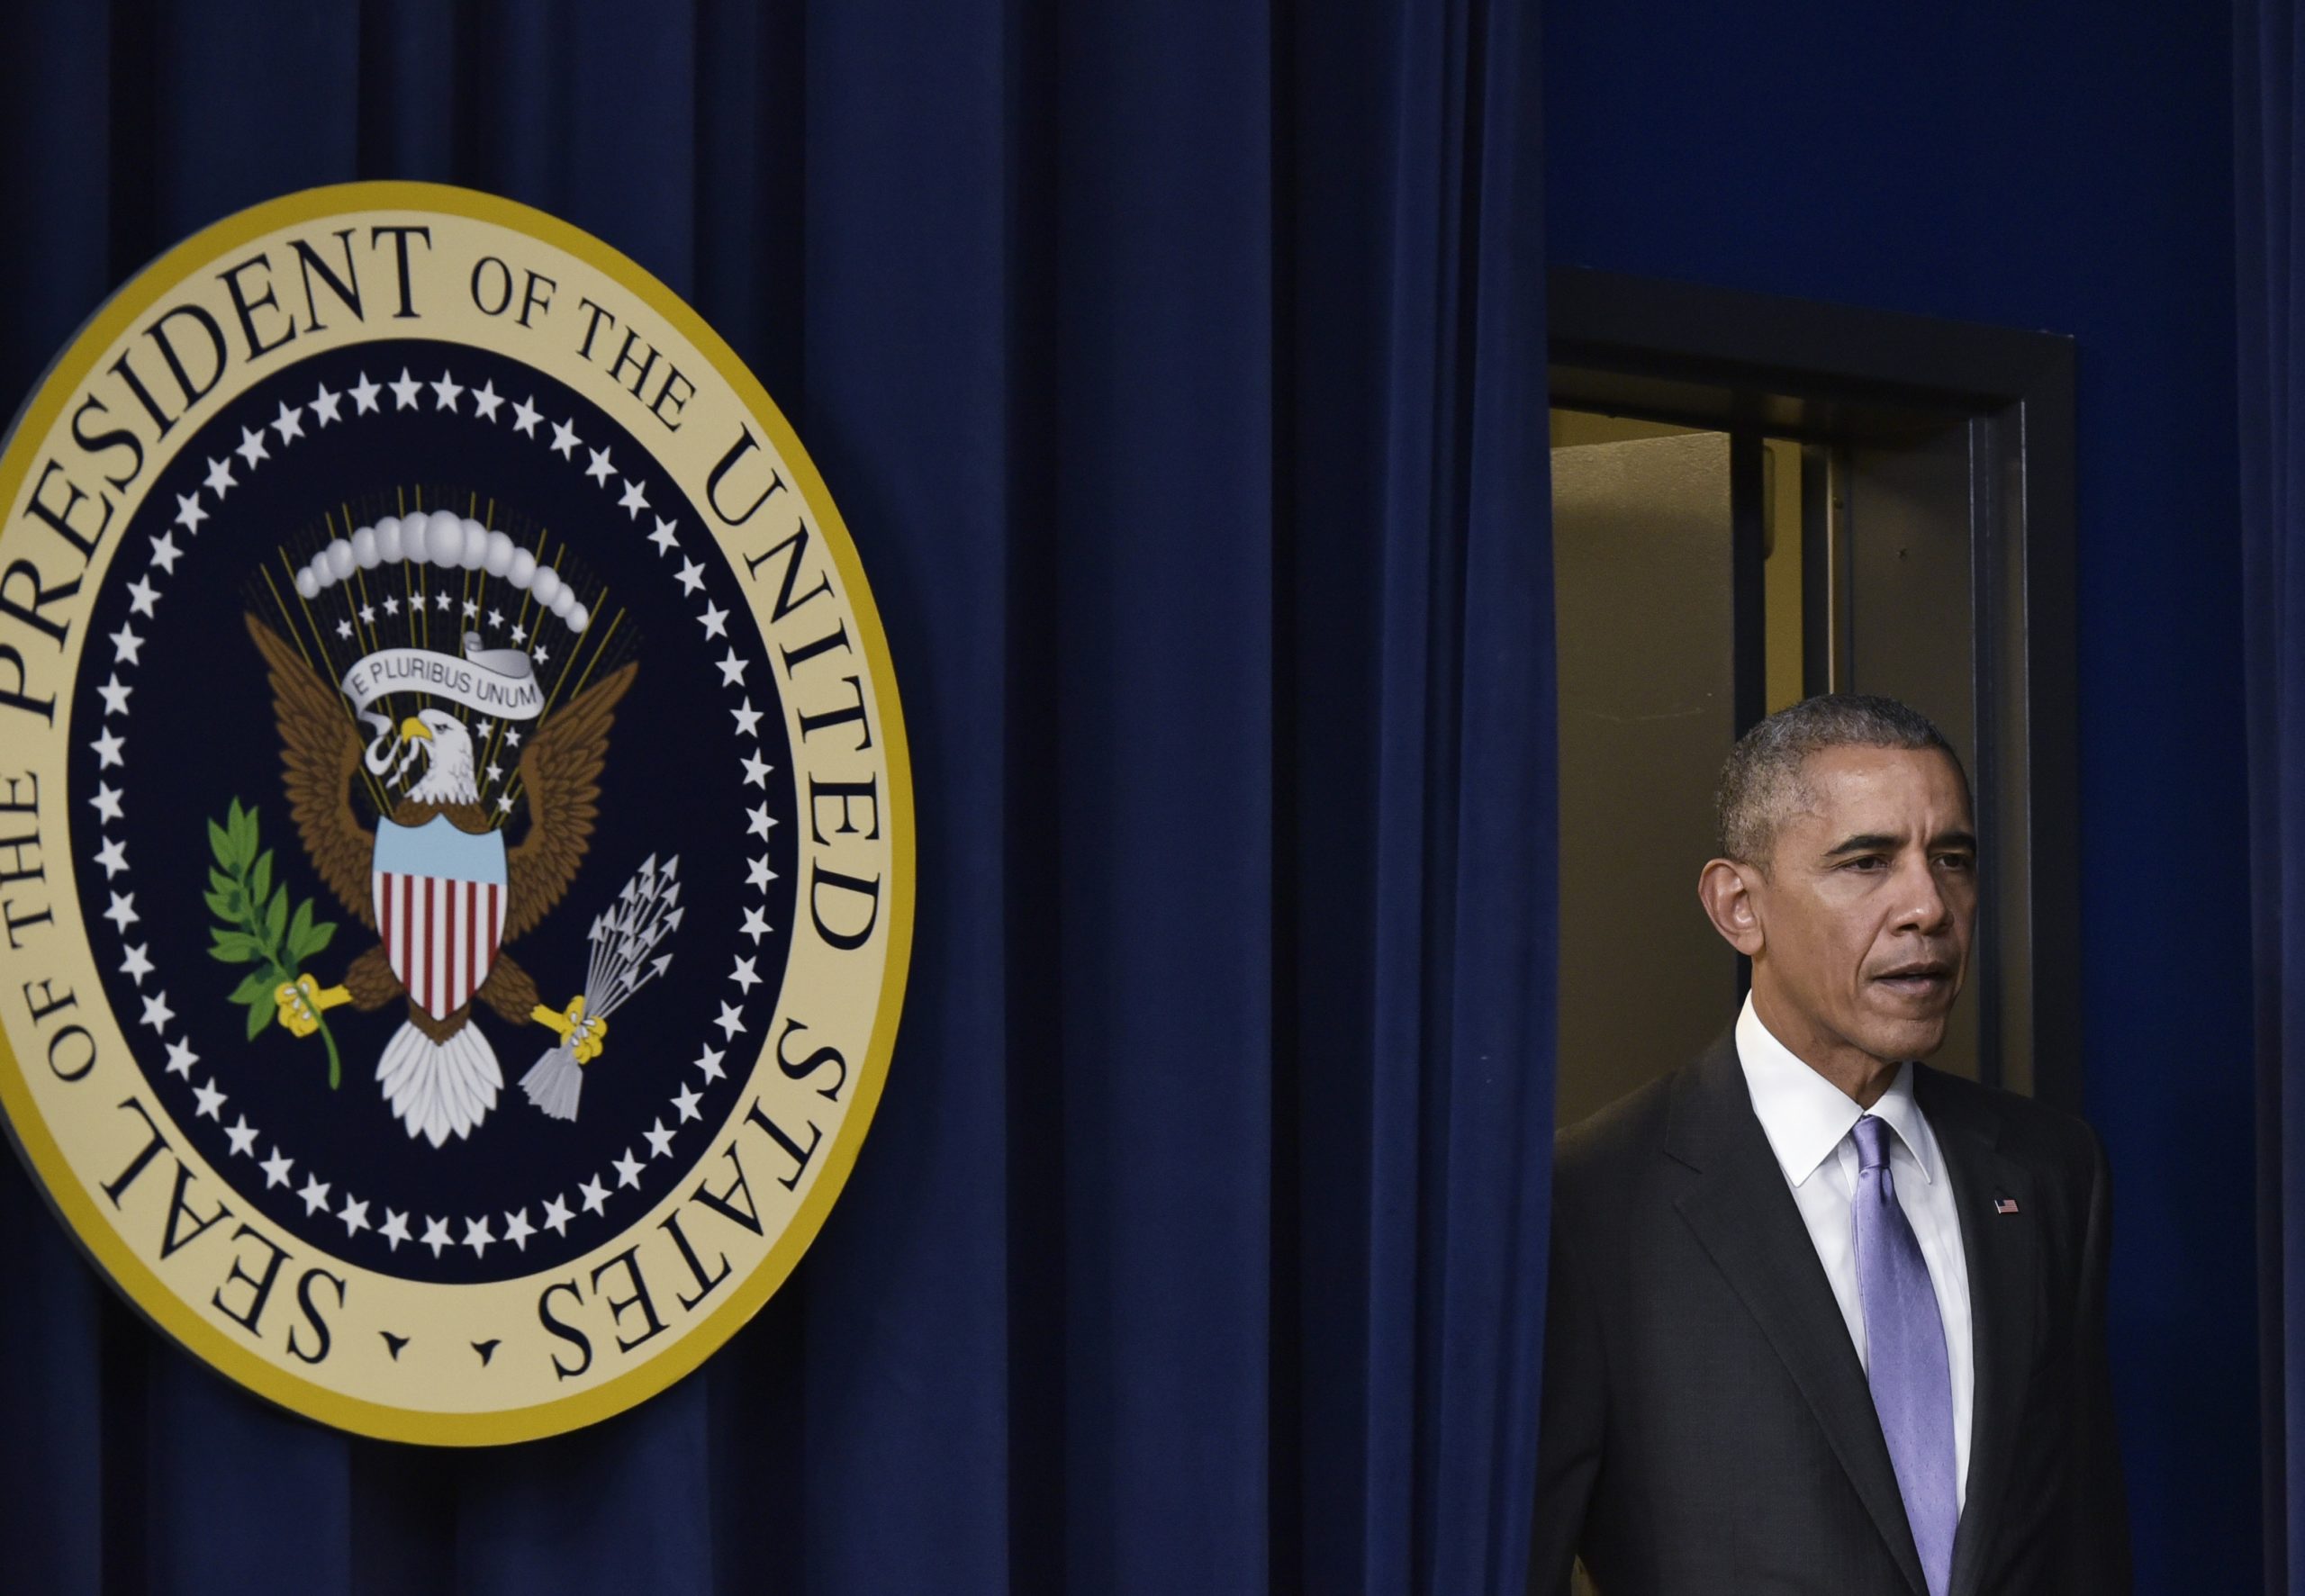 US President Barack Obama arrives for a signing ceremony for the 21st Century Cures Act in the South Court Auditorium, next to the White House on December 13, 2016 in Washington, DC. - The bill speeds up the approval process for new drugs and medical devices and expands funding for medical research, including the cancer moonshot initiative led by Vice President Joe Biden. The funding will also aid research on opioid abuse and brain diseases, including Alzheimers. (Photo by MANDEL NGAN / AFP) (Photo by MANDEL NGAN/AFP via Getty Images)